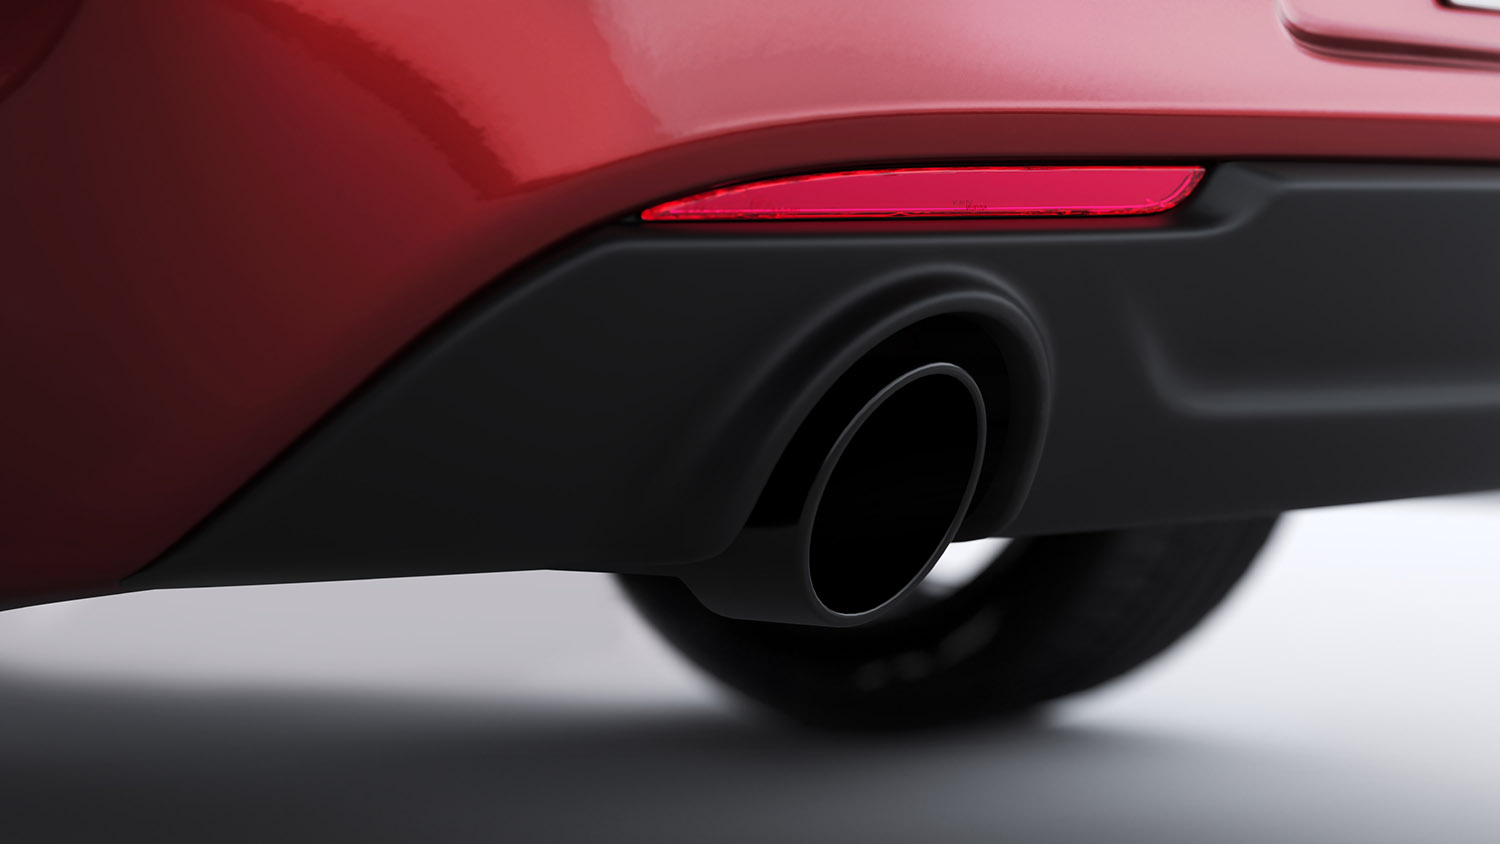 Black, rounded exhaust tips on the 2023 Chrysler 300C accent an active exhaust system that delivers a muscular, throaty sound.